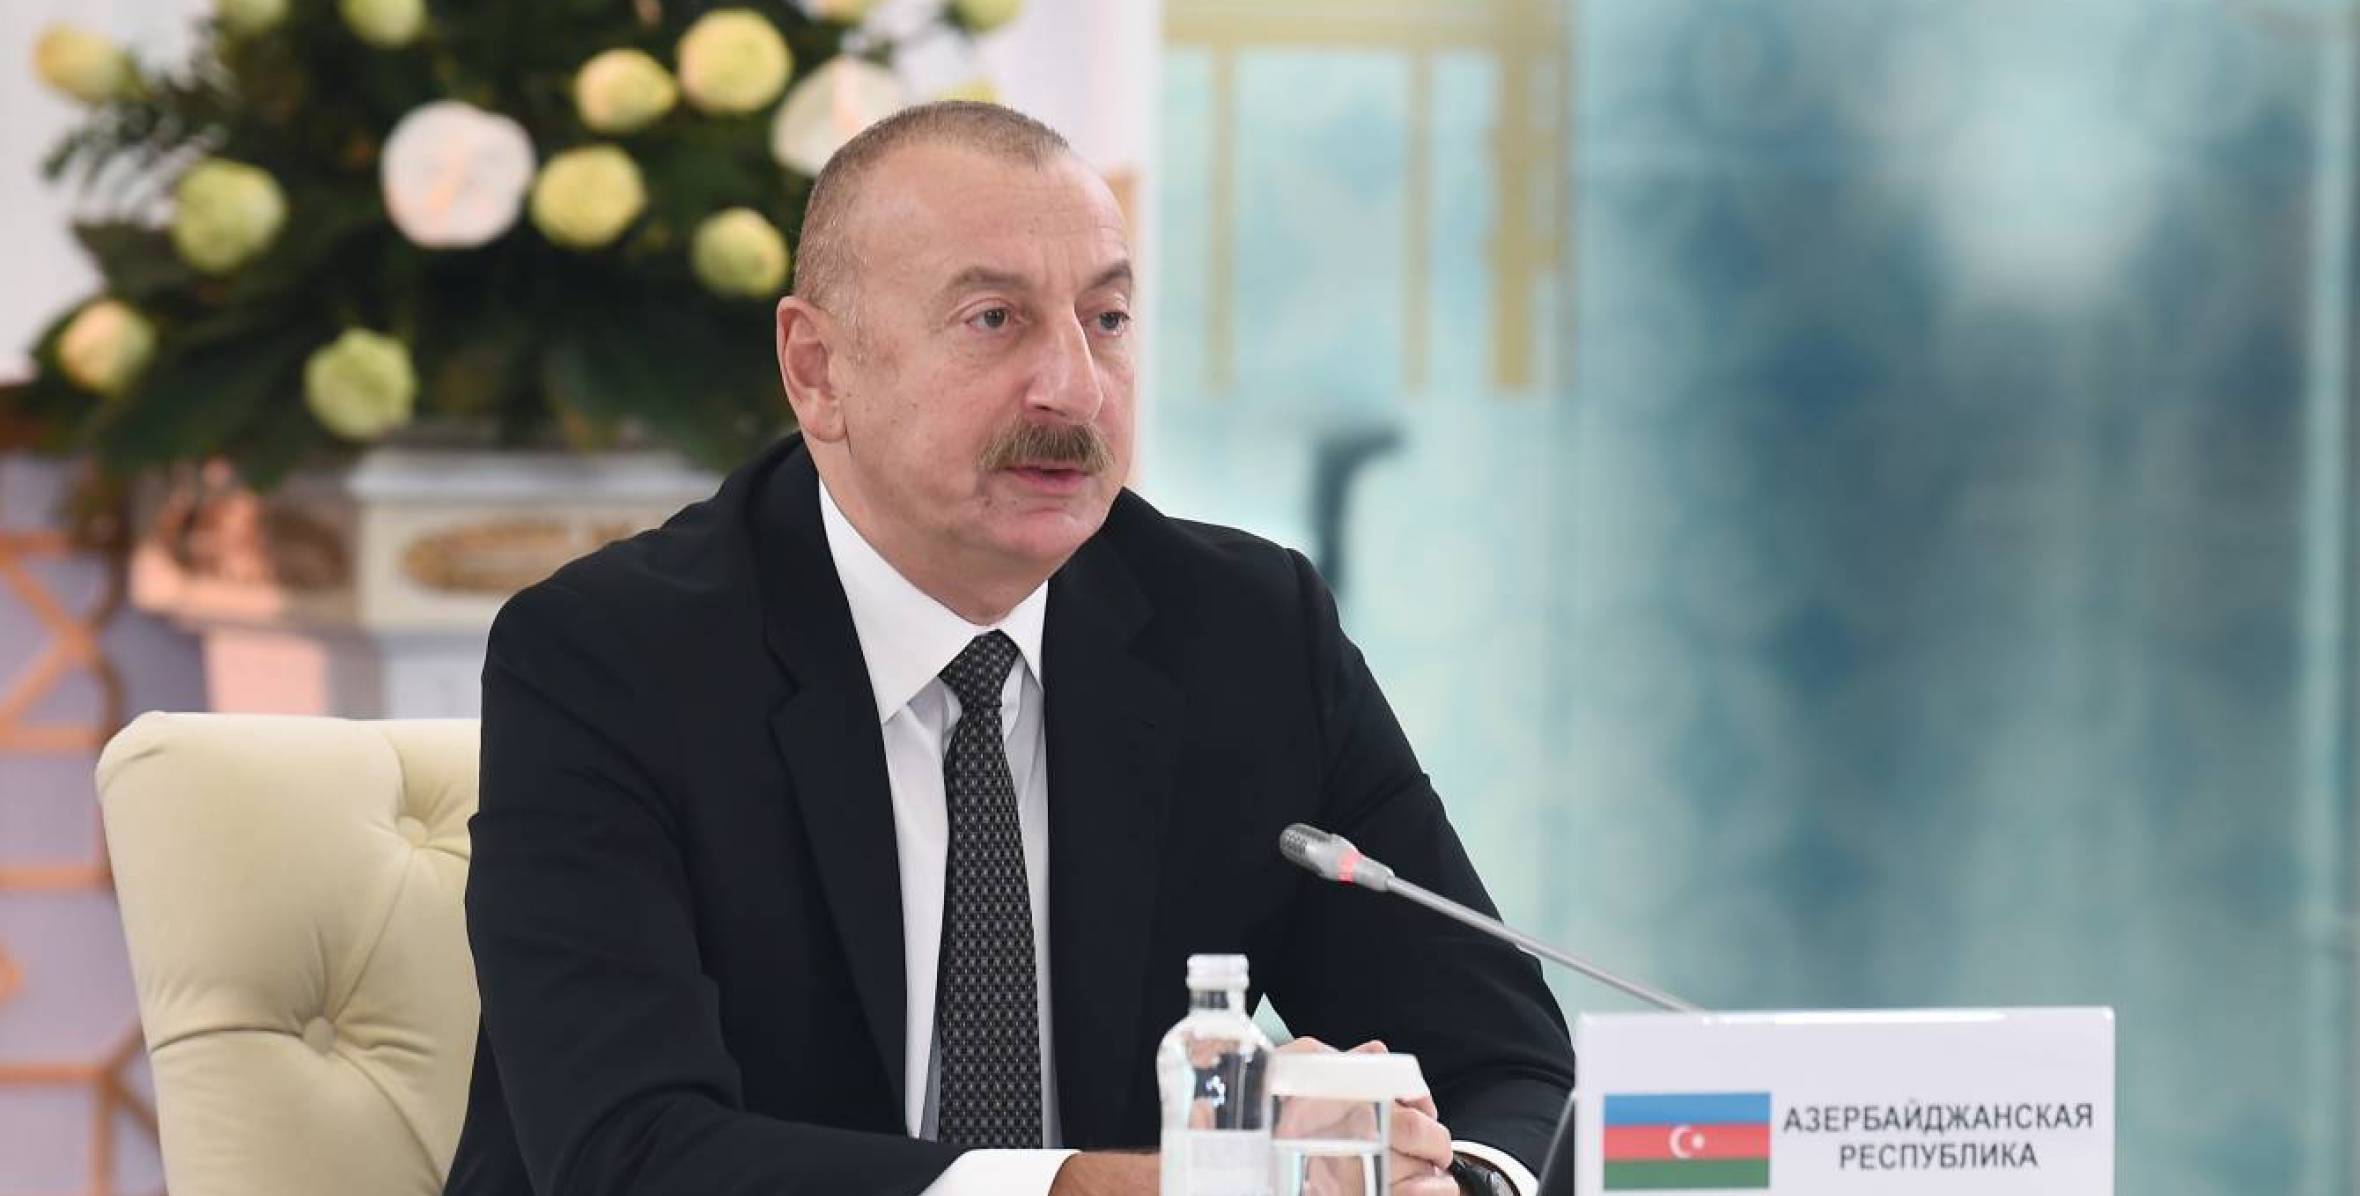 Speech by Ilham Aliyev at the meeting of CIS's councils of heads of state in Astana